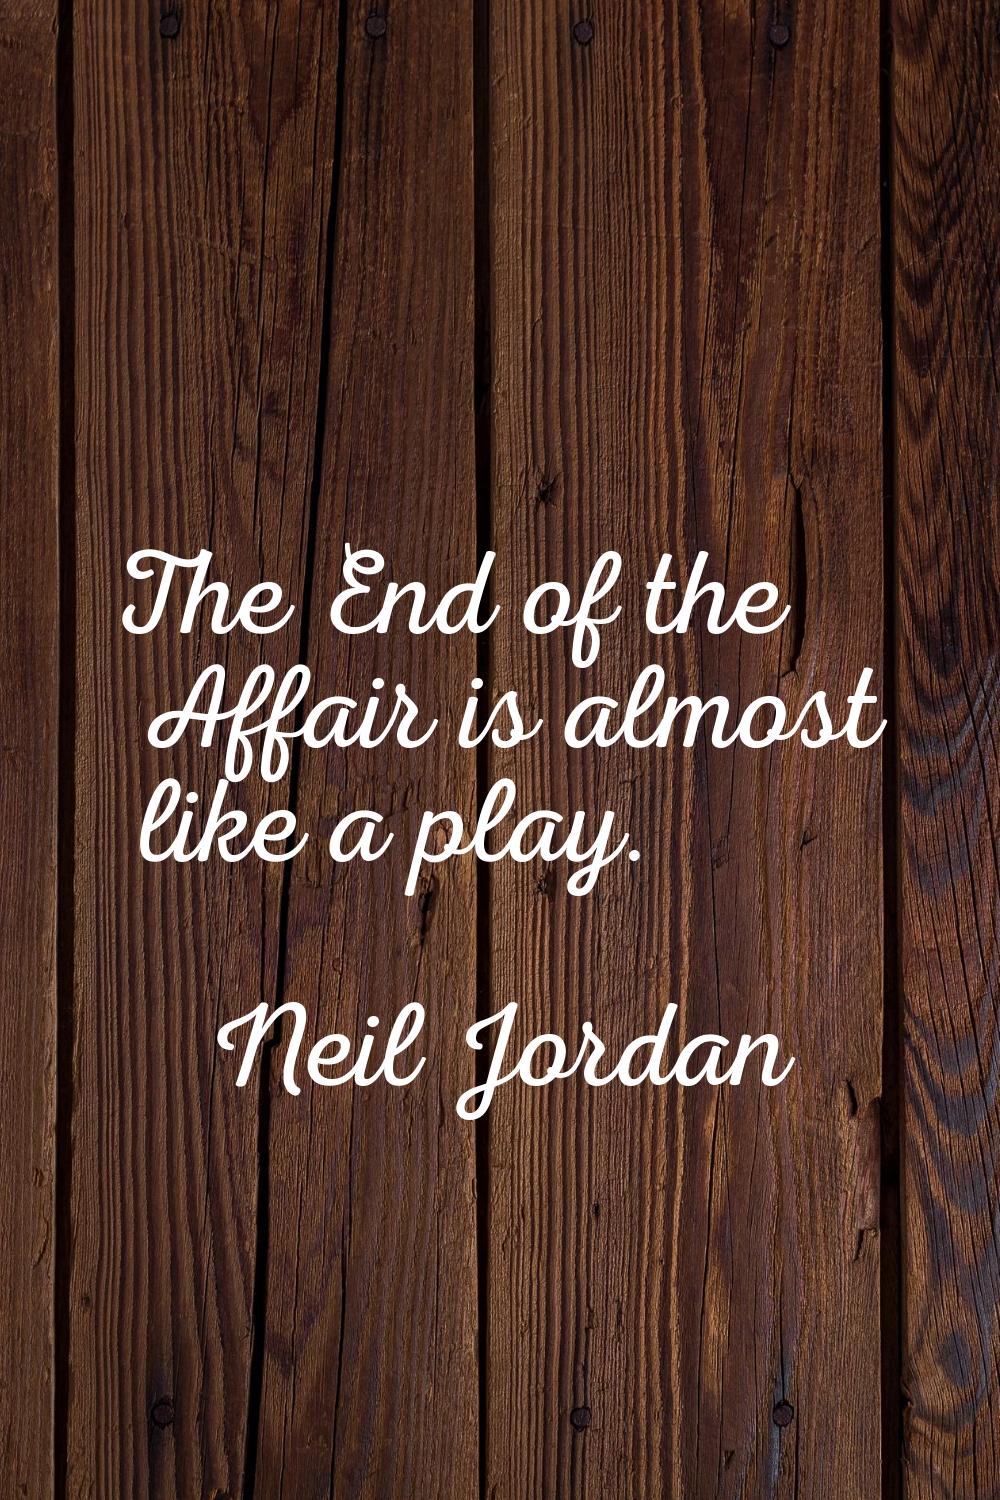 The End of the Affair is almost like a play.